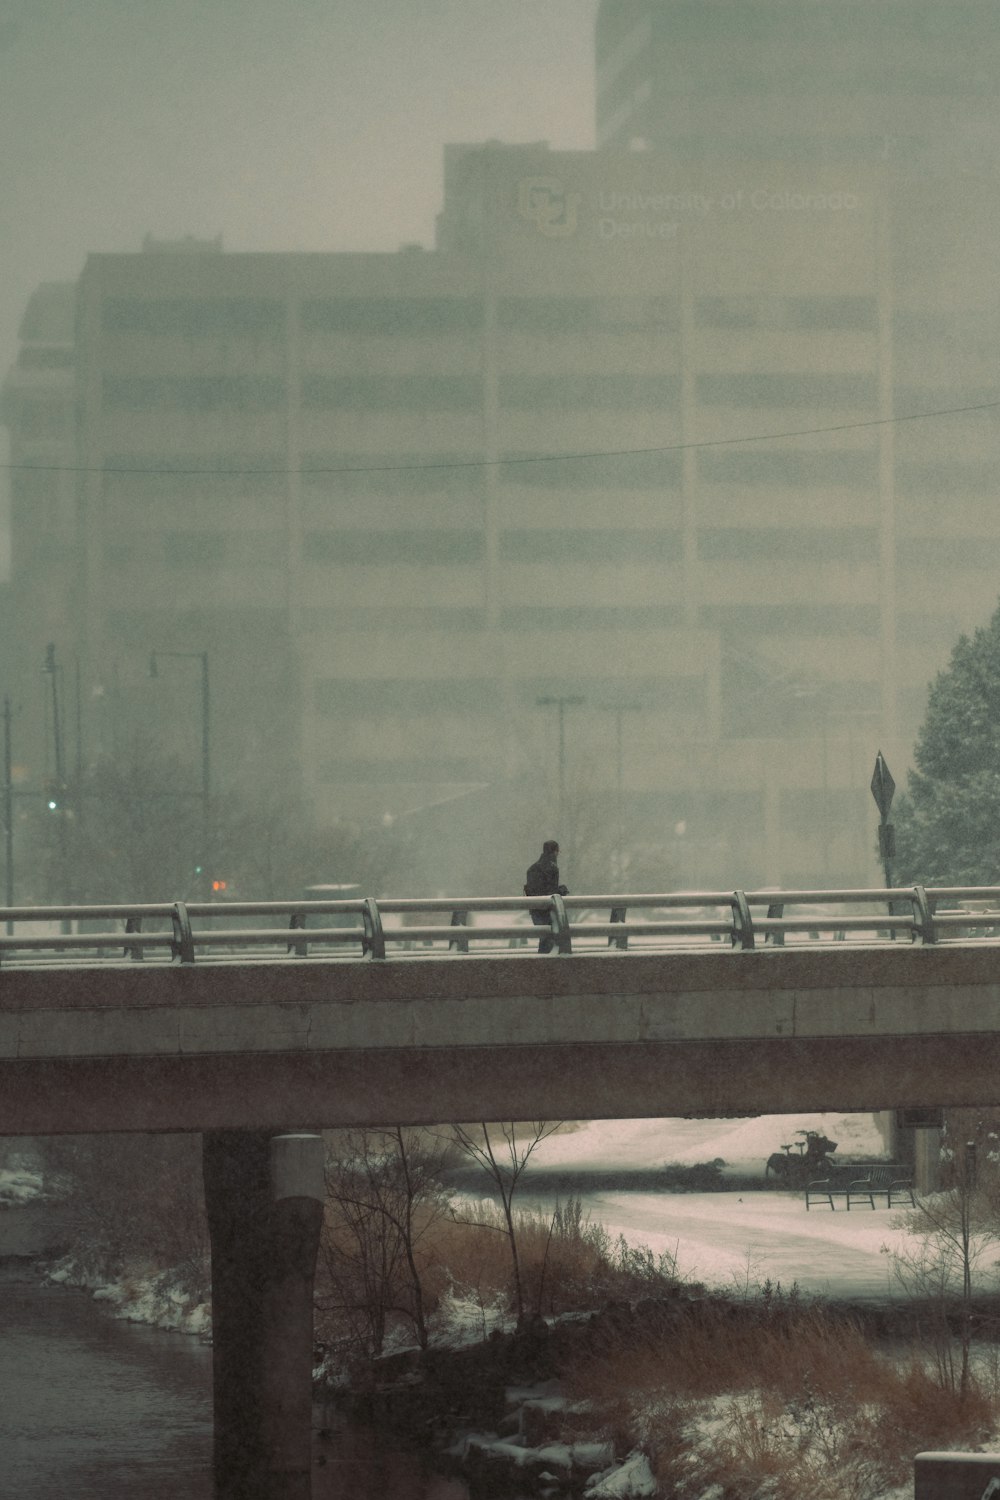 a person walking across a bridge in the snow